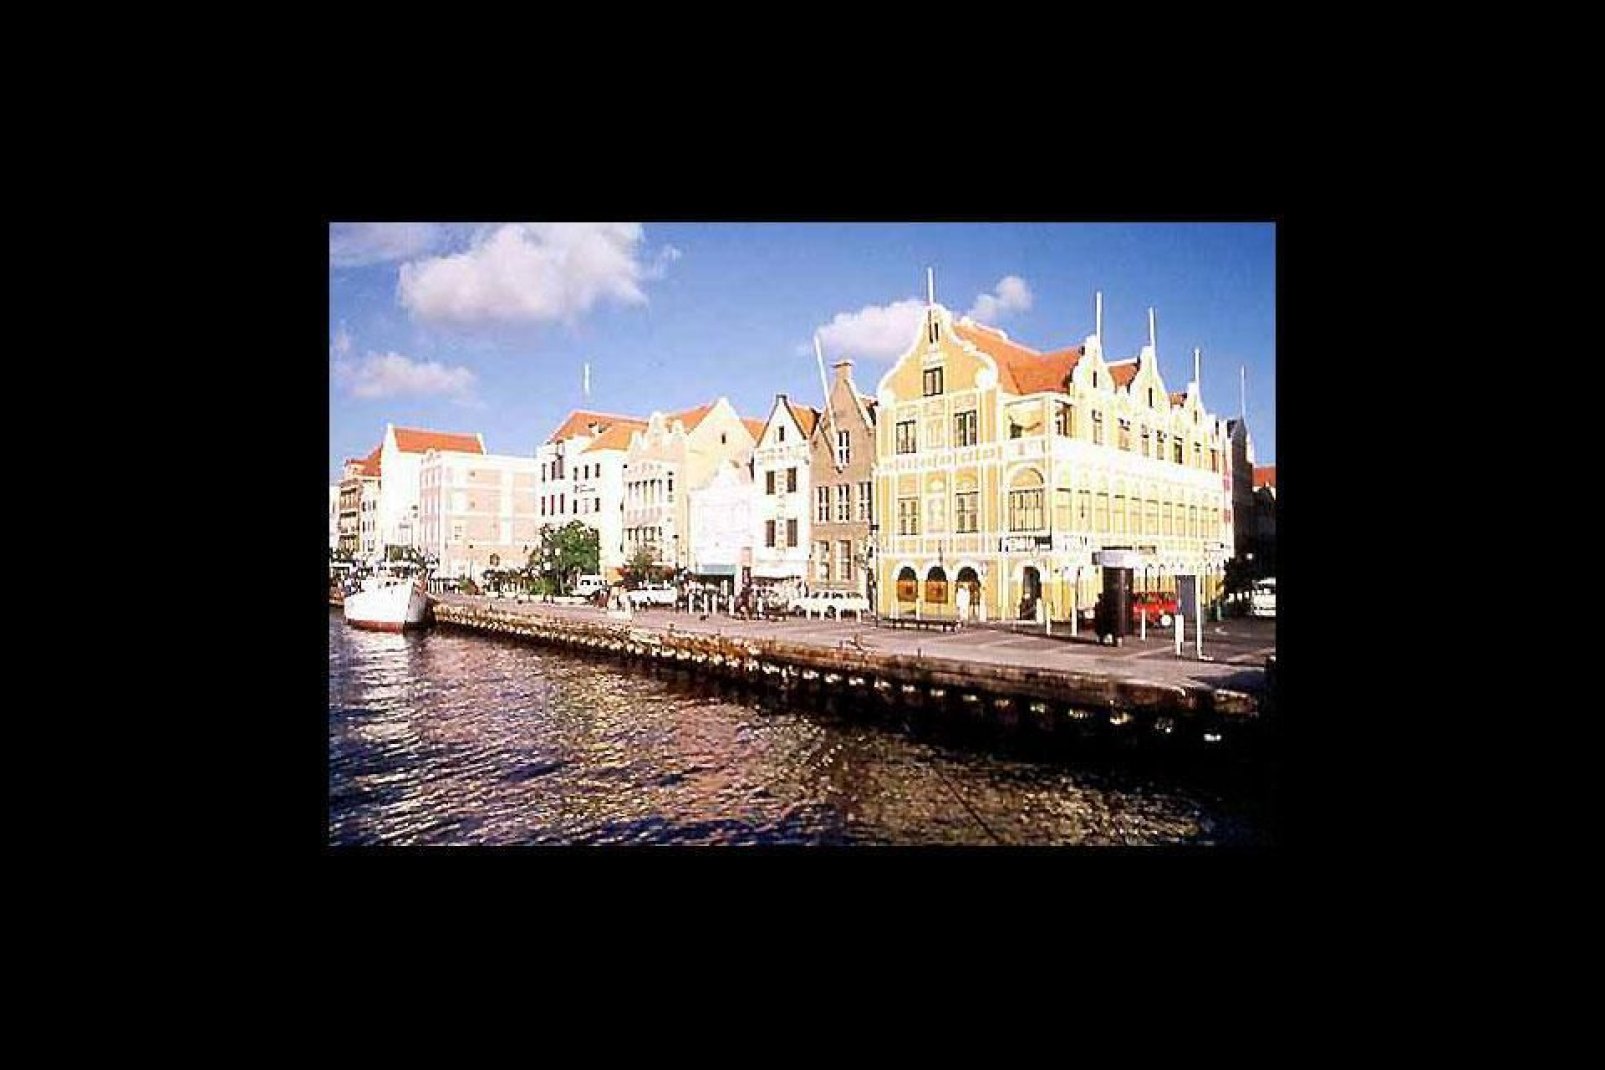 The capital of the island, overlooking a natural port, has conserved numerous pastel-coloured Dutch-style buildings.